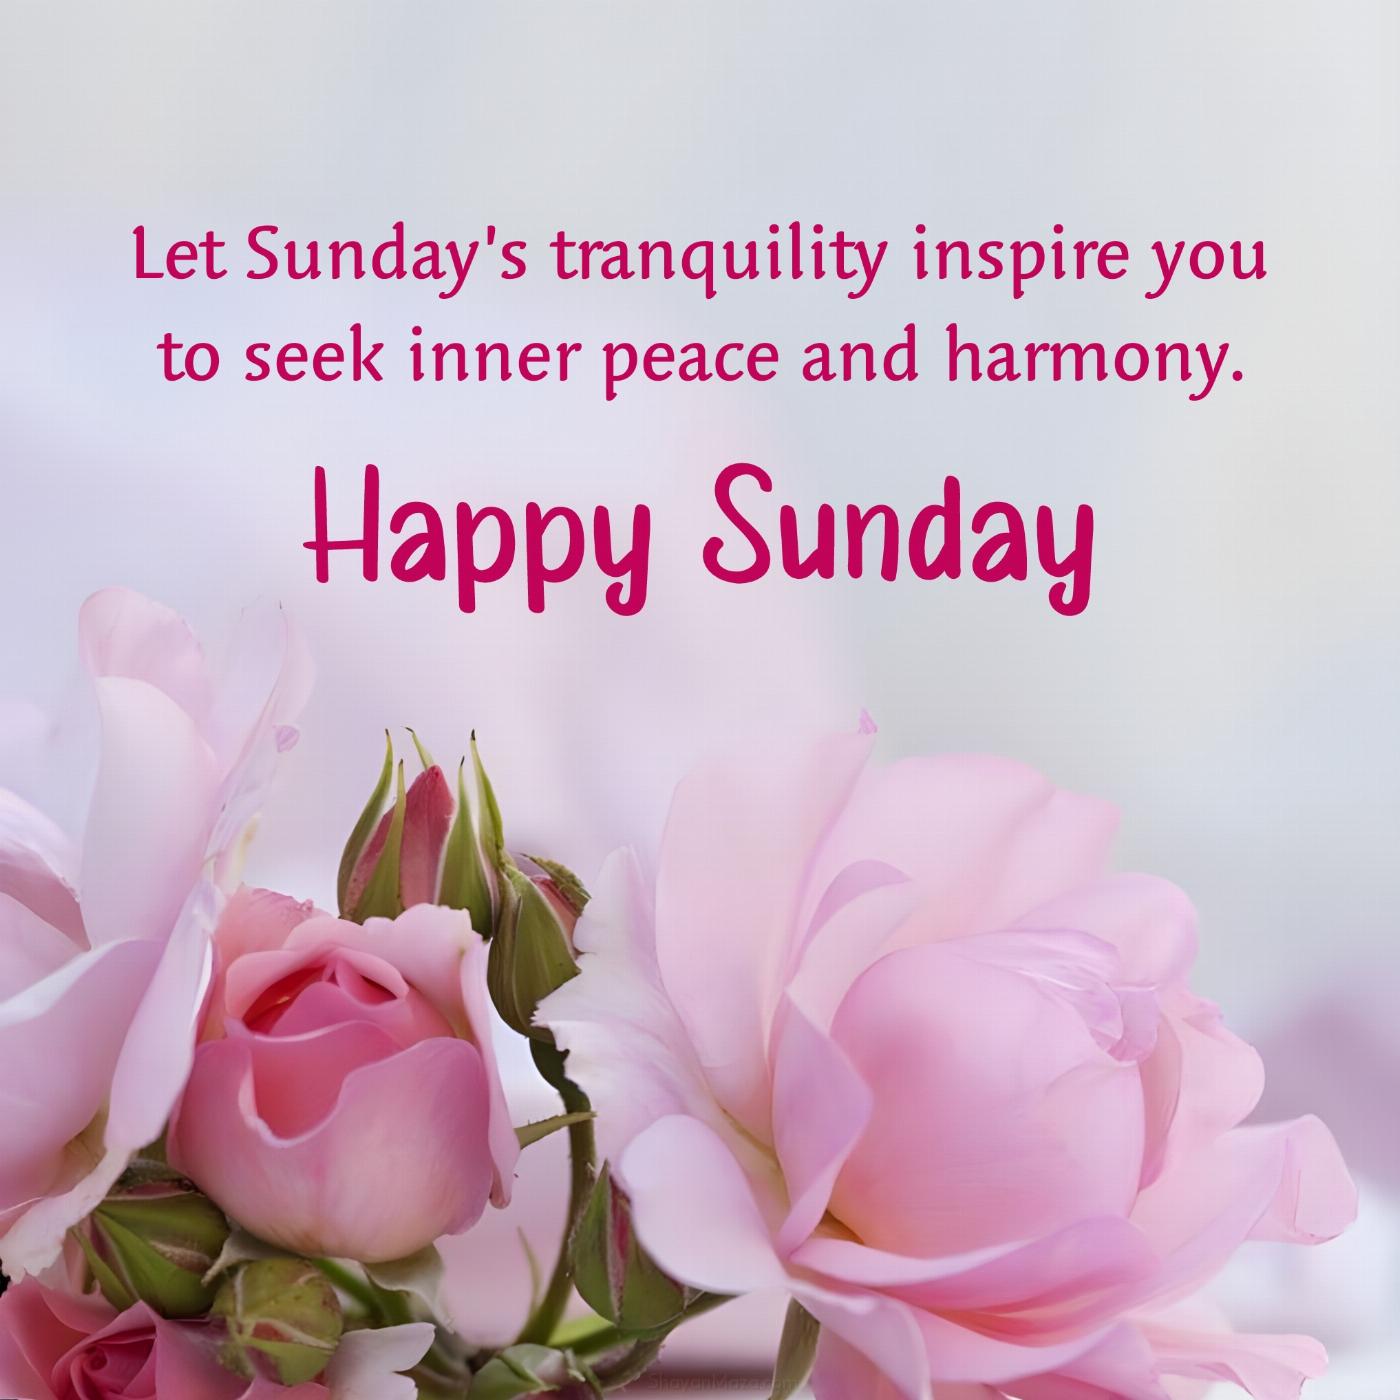 Let Sundays tranquility inspire you to seek inner peace and harmony